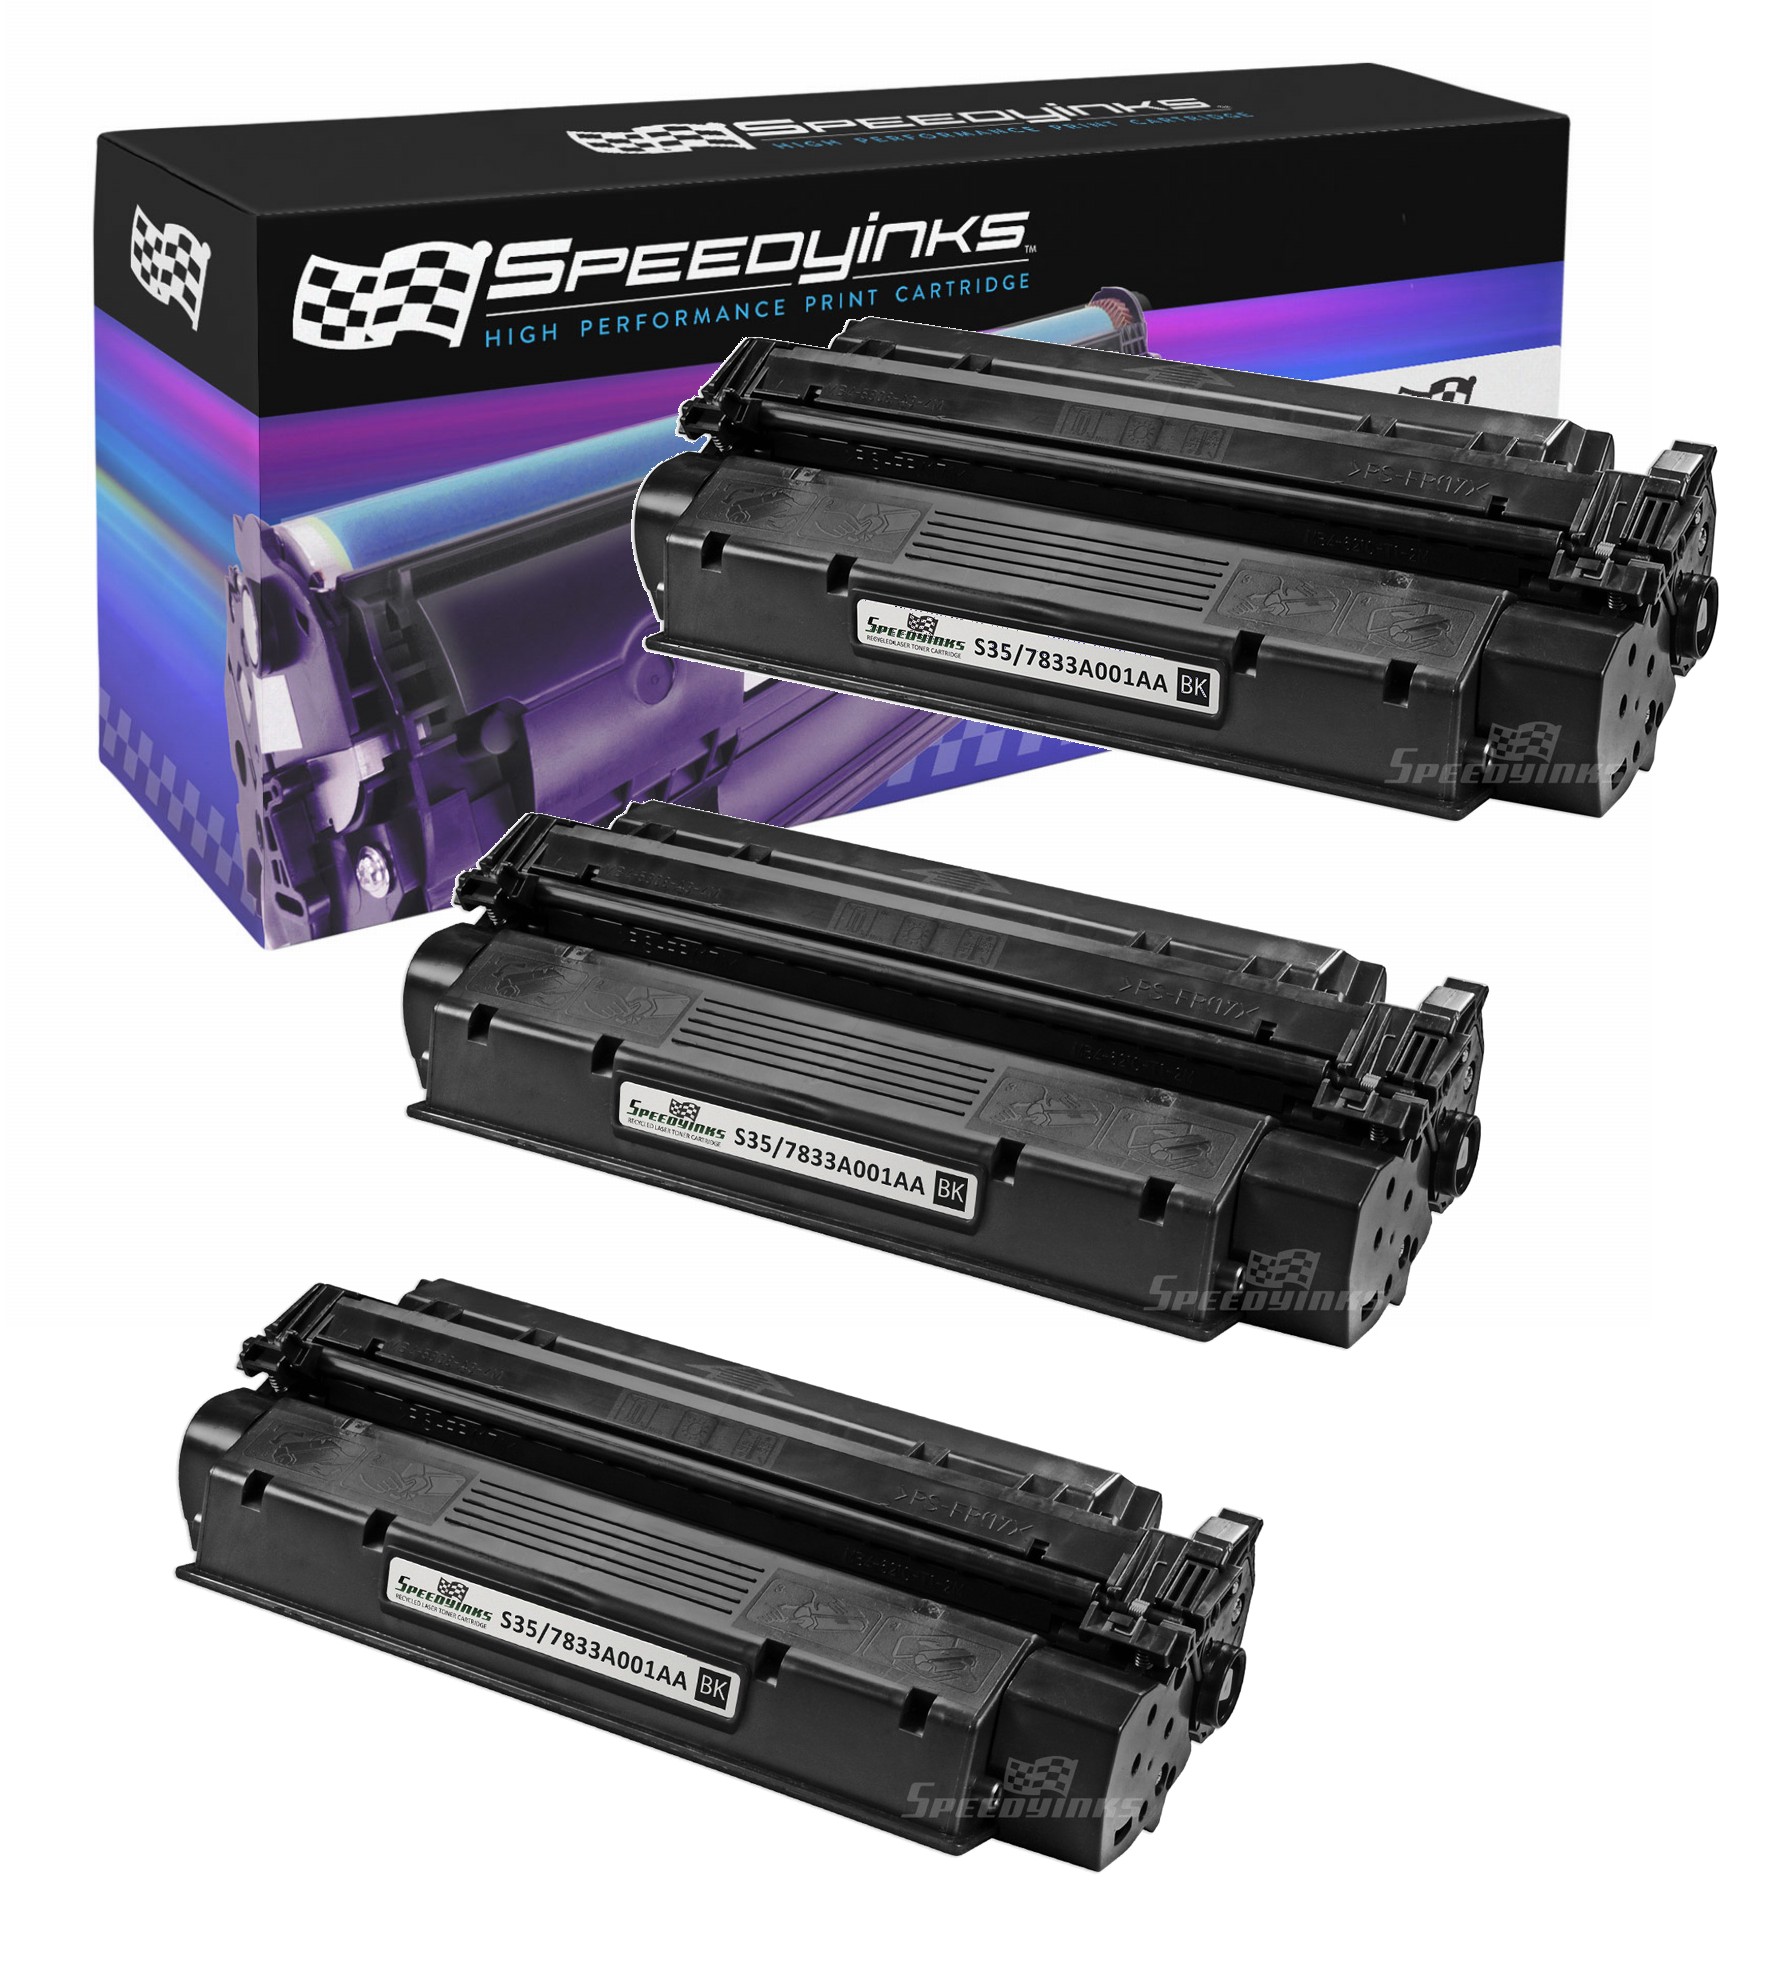 SpeedyInks - 3pk Remanufactured Canon S35 S-35 7833A001AA Toner Cartridge Replacement for Digital Copier ICD-340 ImageClass D320 D340 D383 Canon L170 FX-8 - image 1 of 3